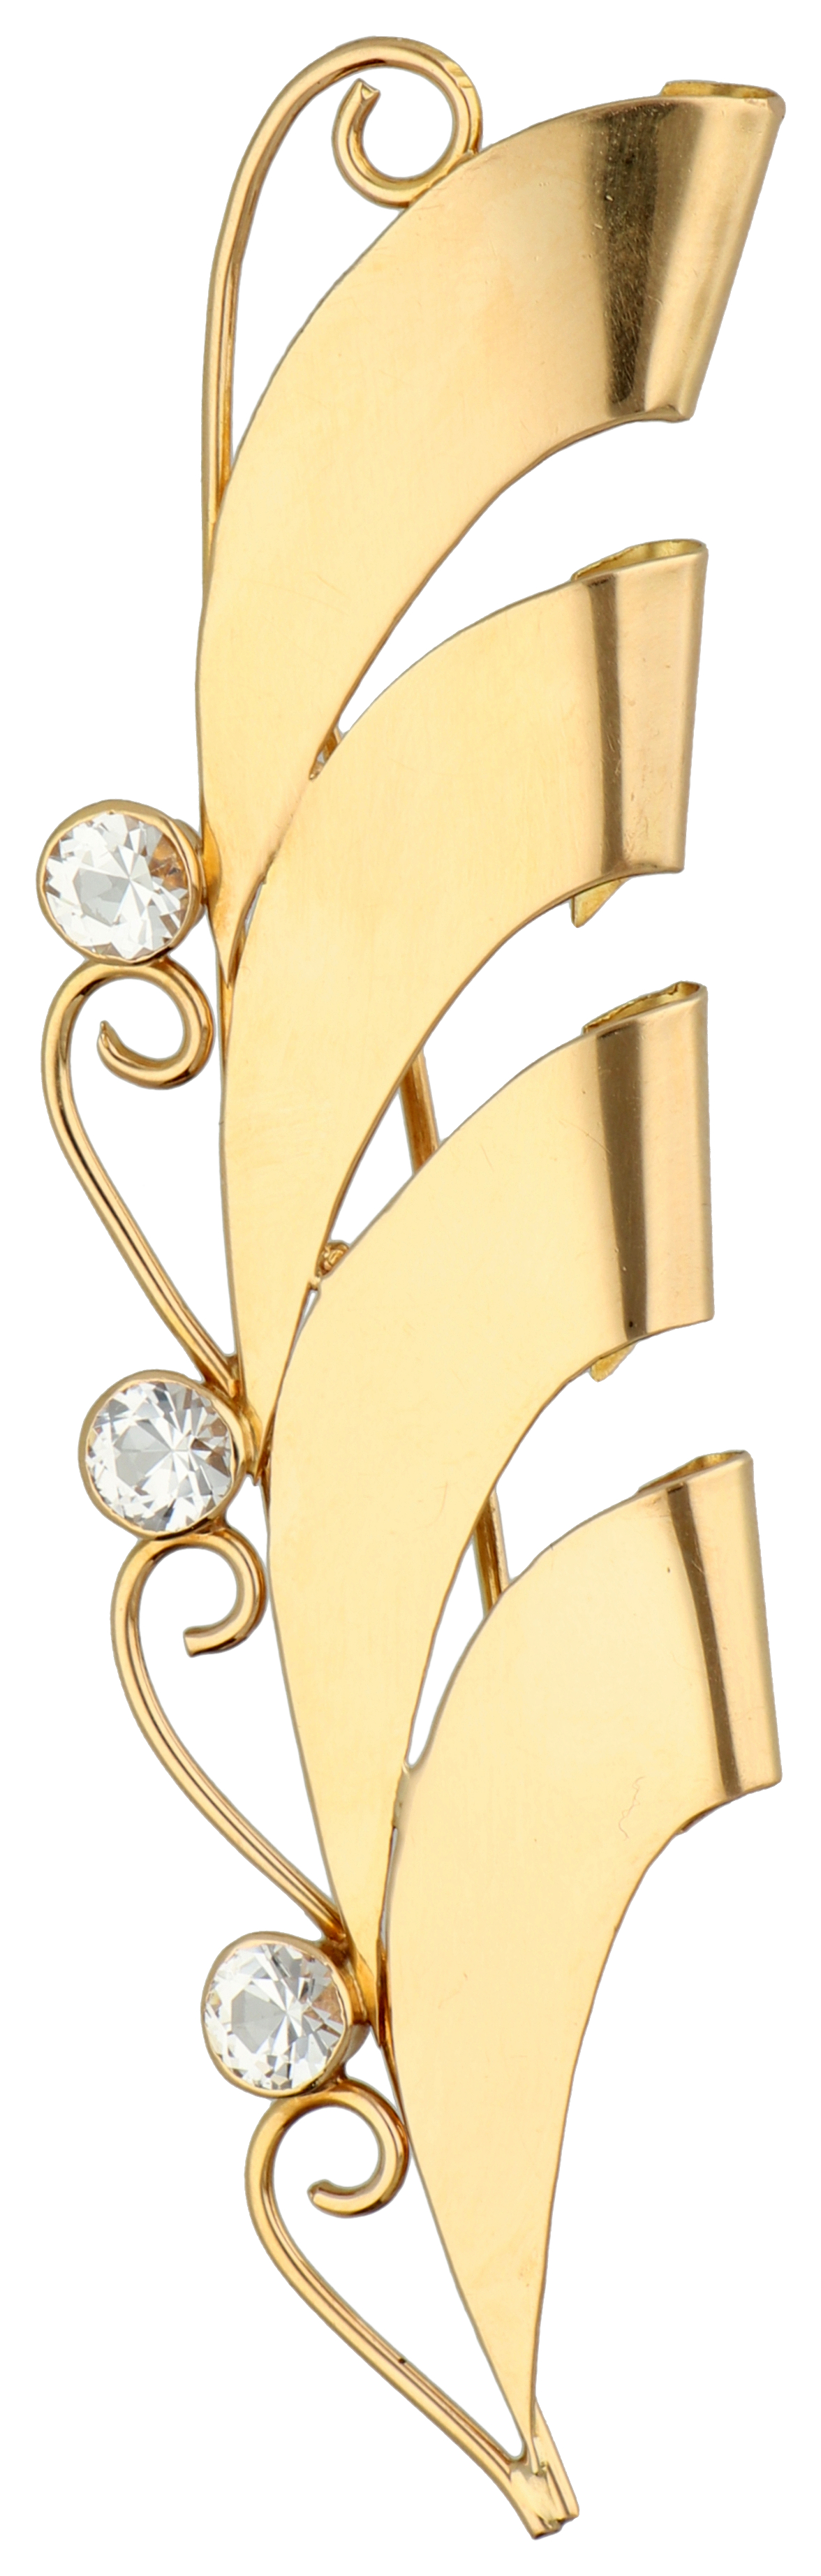 No Reserve - 18K Yellow gold Swedish lily of the valley brooch from 1946 with rock crystal.